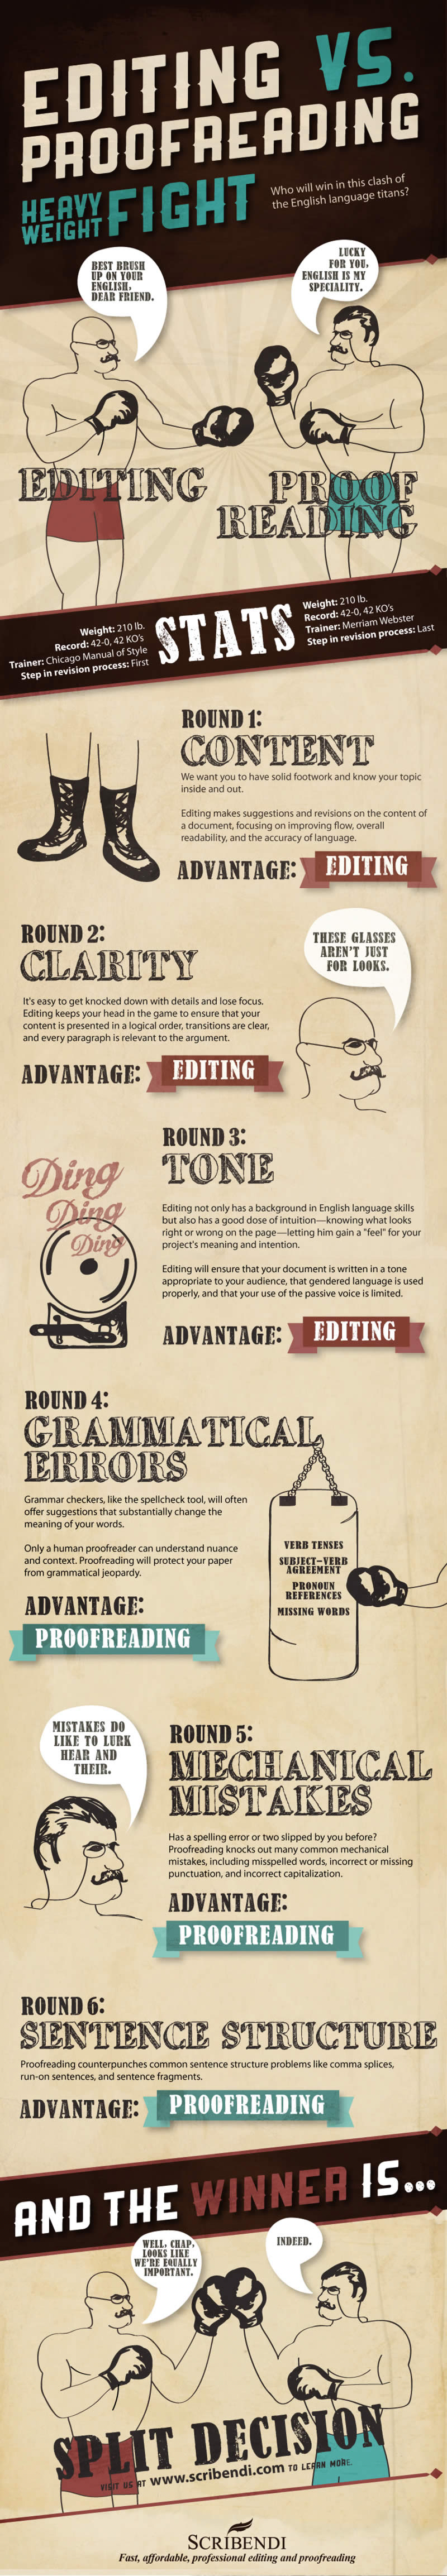 Online Proofreading and editing services